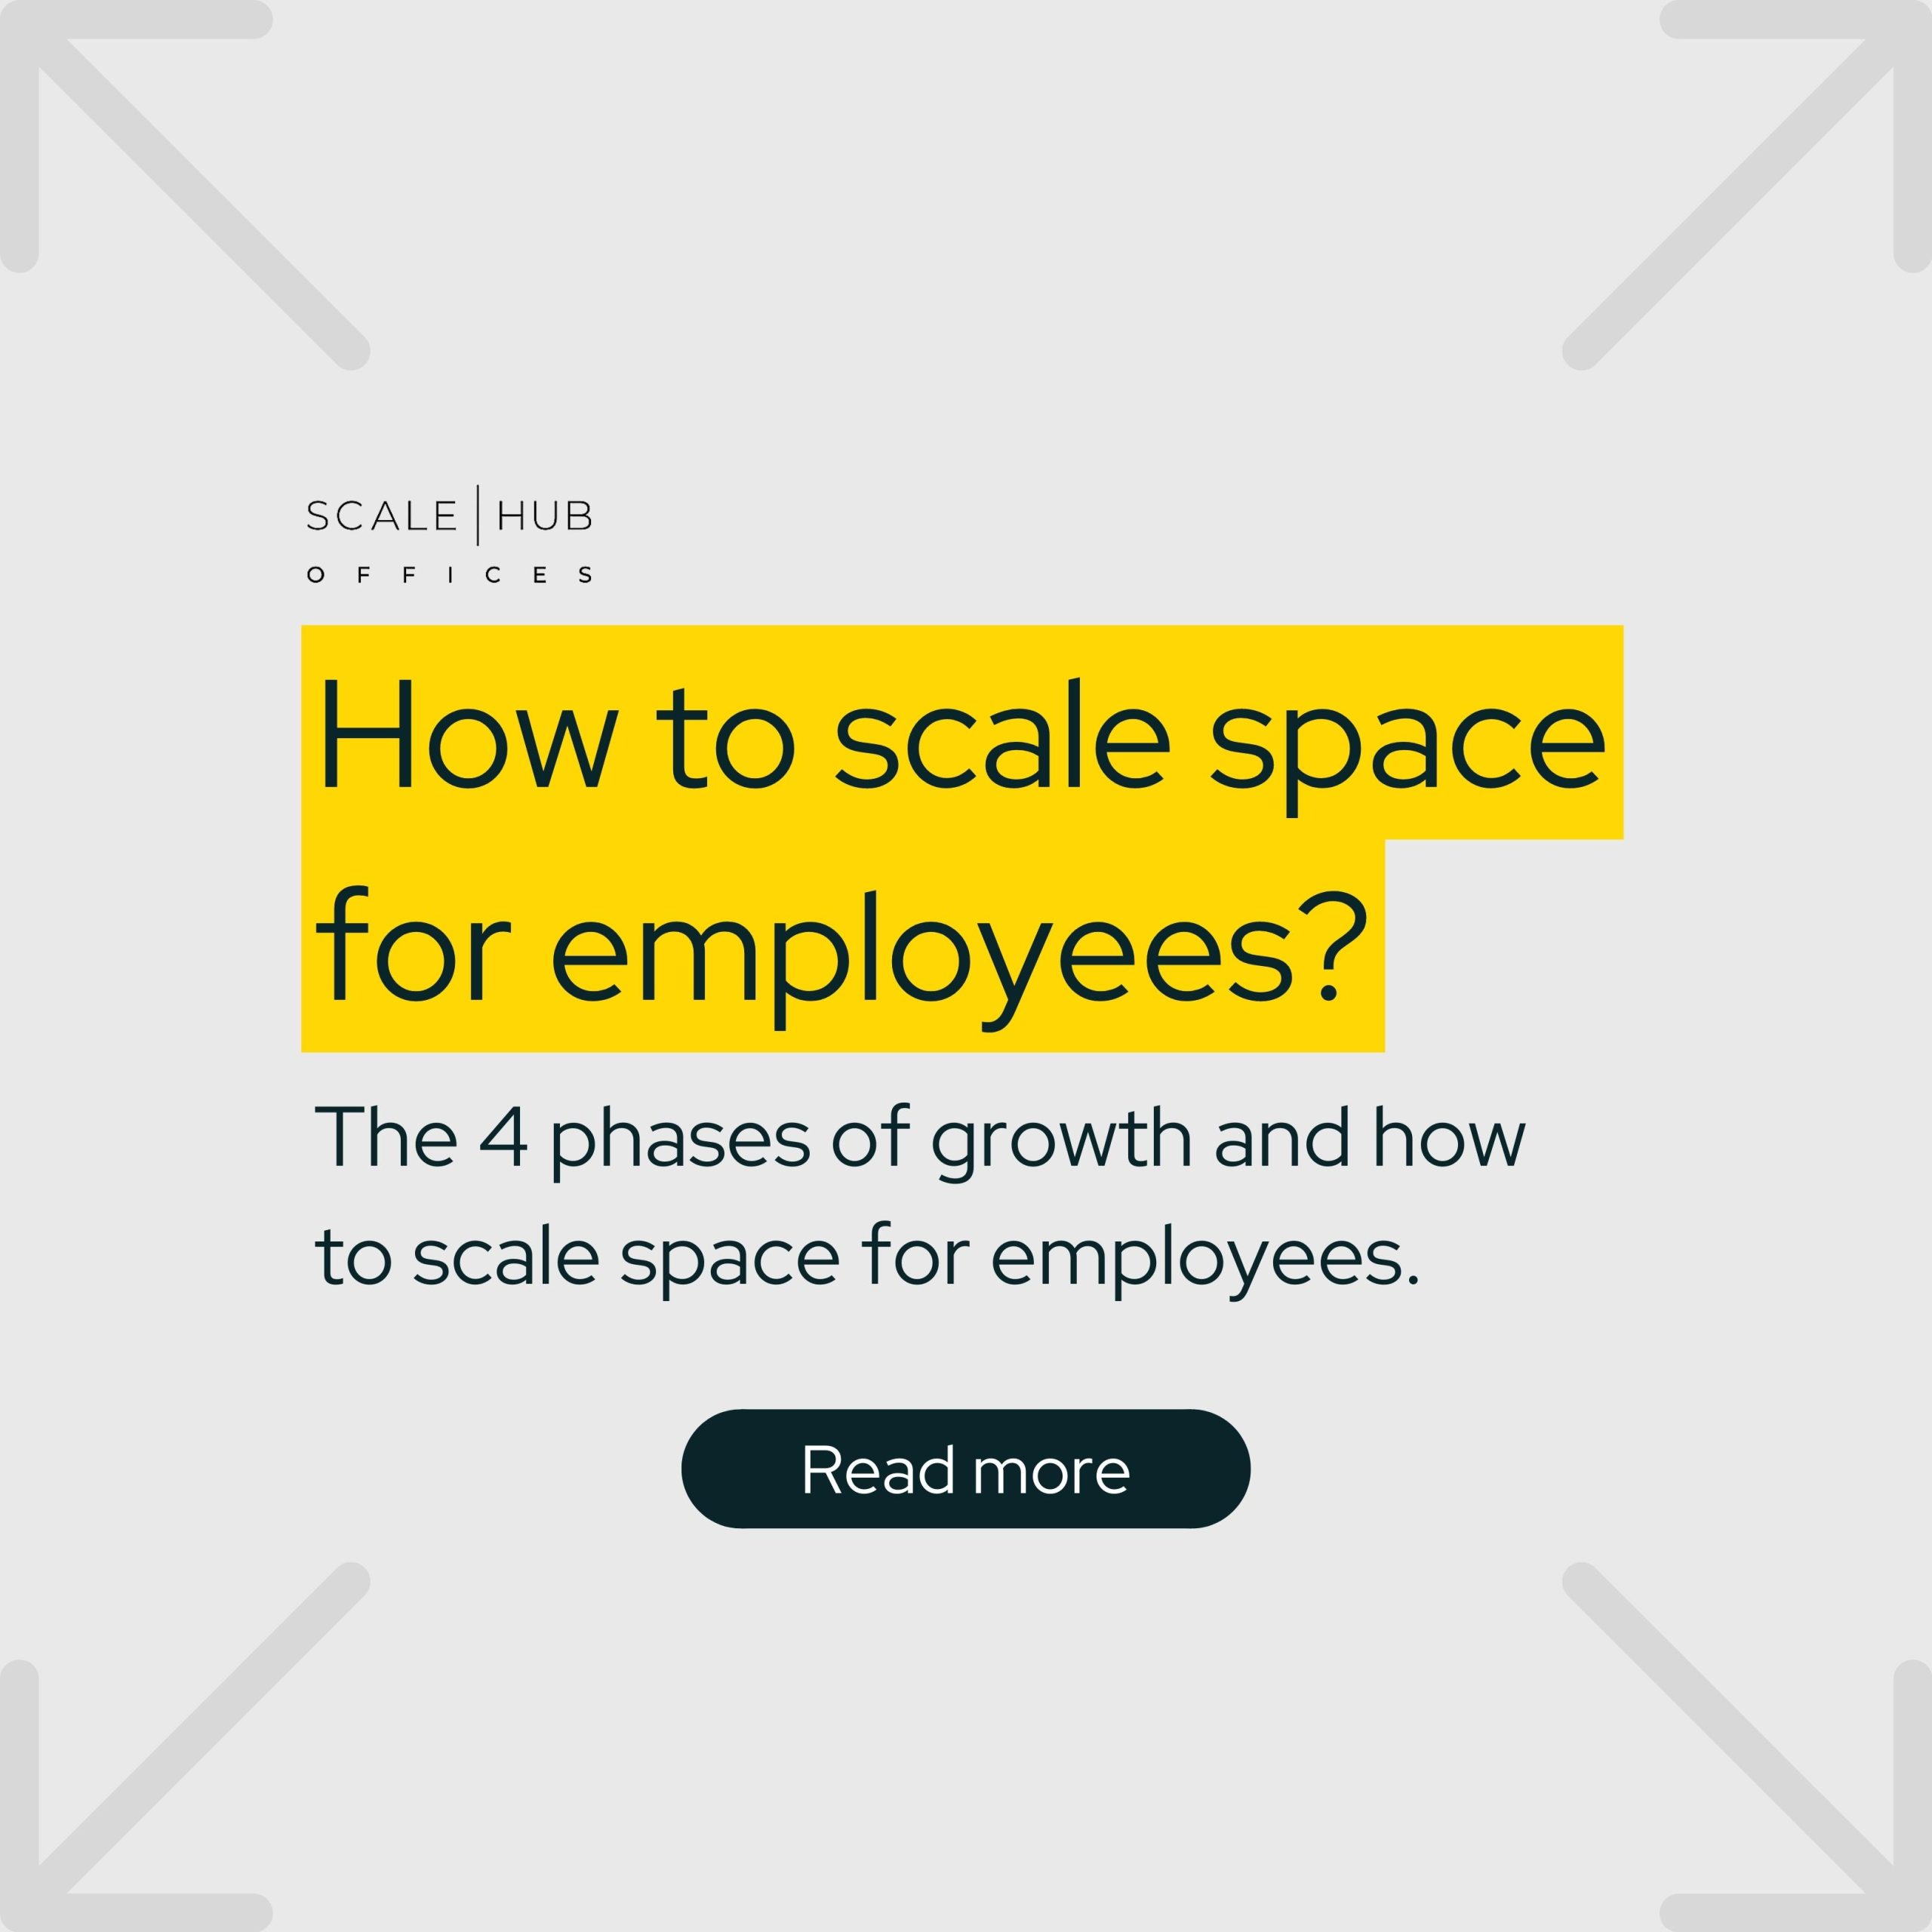 How to scale space for employees